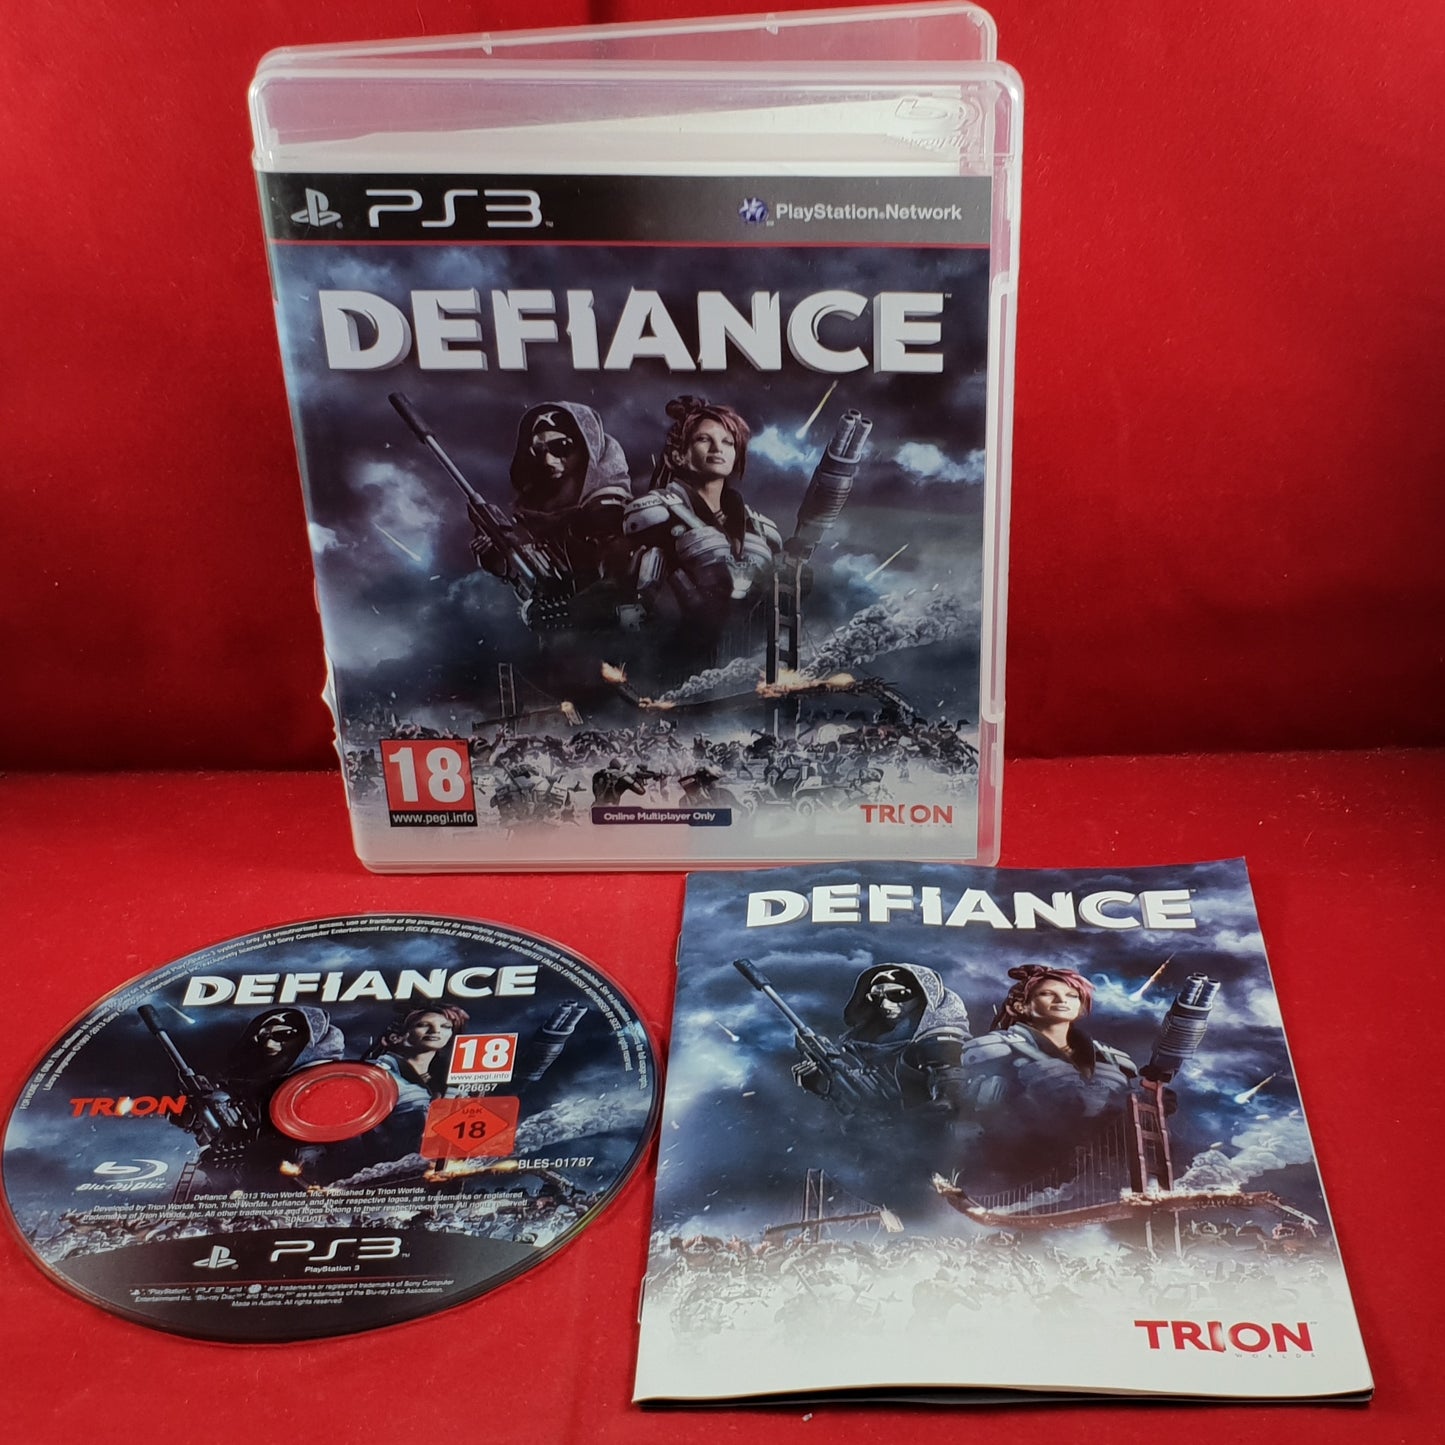 Defiance Sony Playstation 3 (PS3) Game